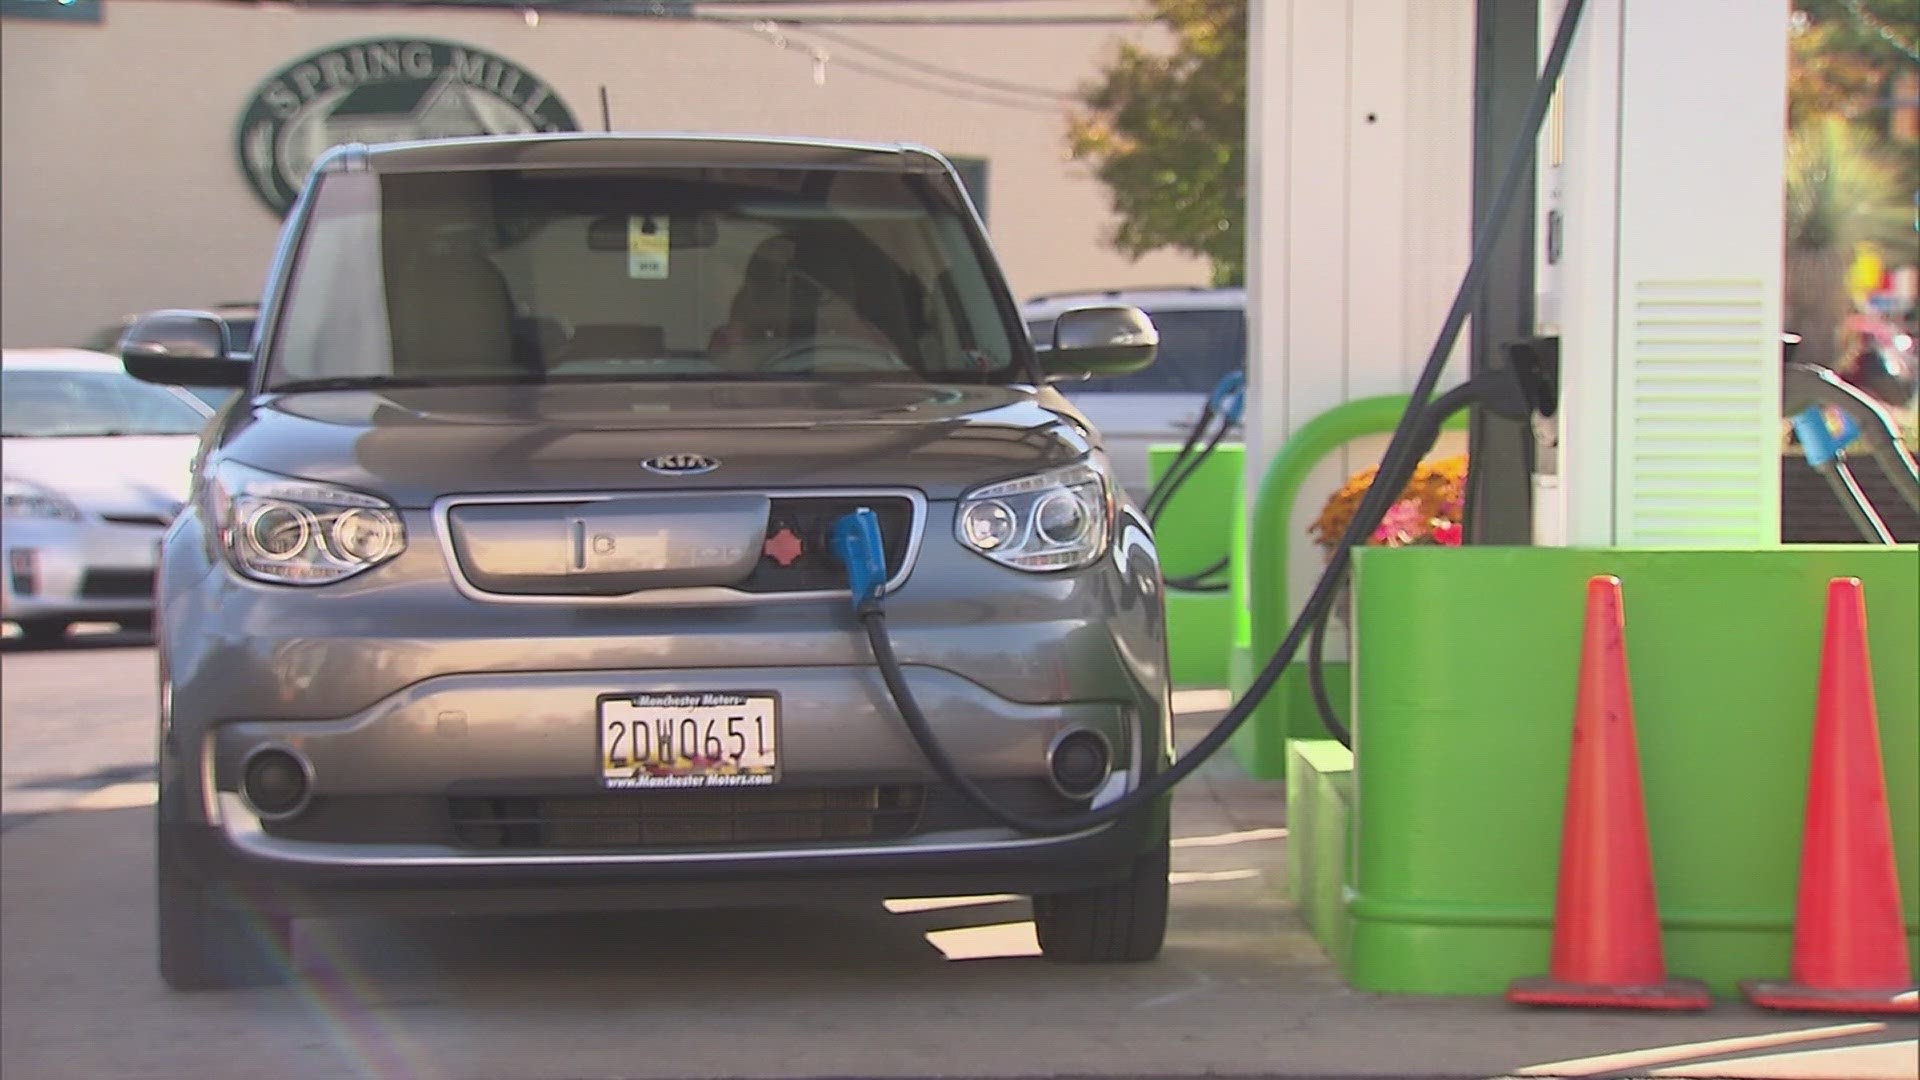 The city hopes to add more and more charging stations in coming years to keep up with demand.